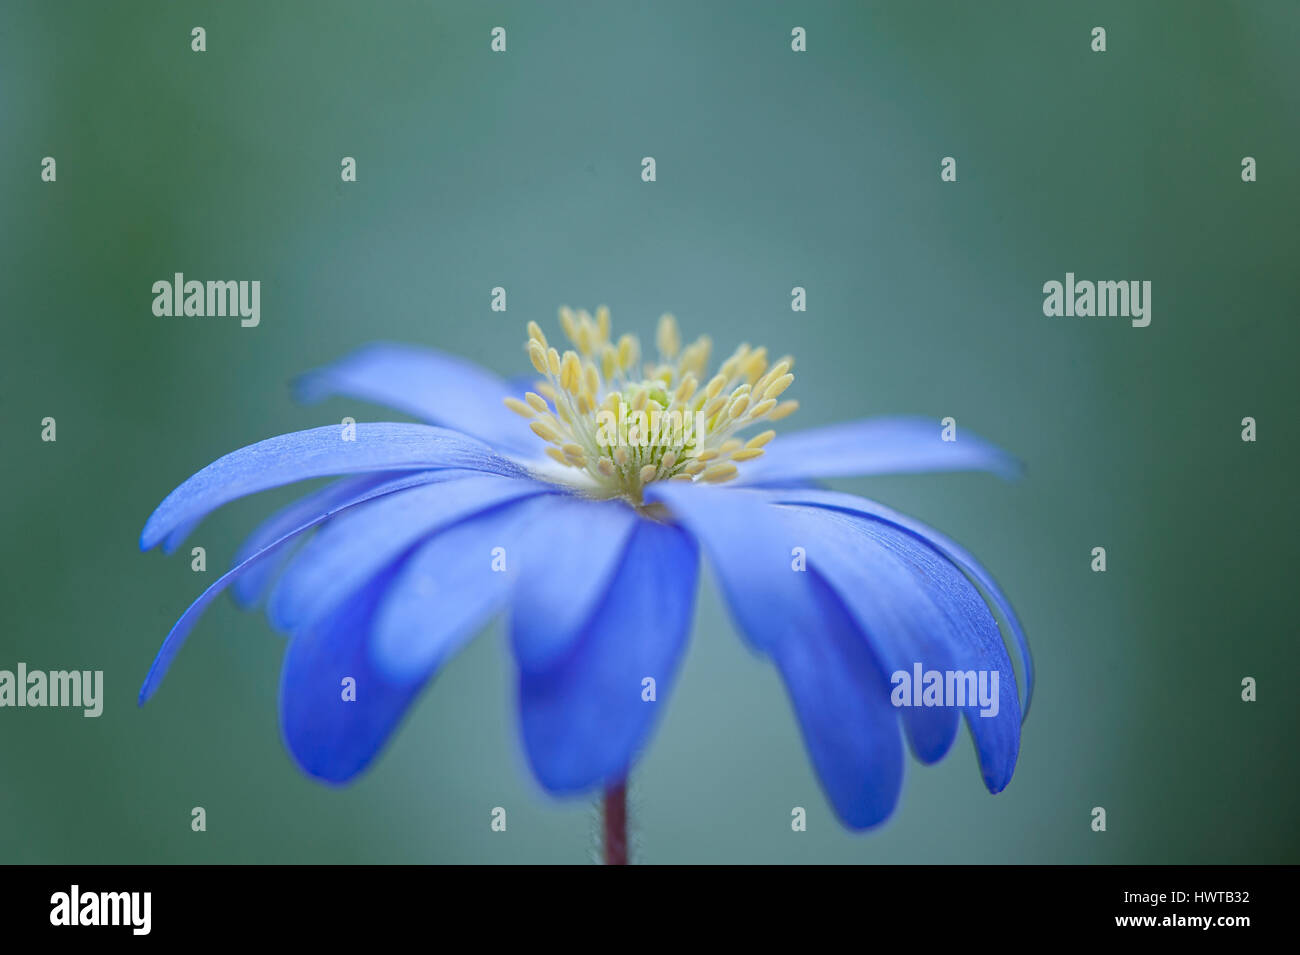 Close-up image of the delicate, blue, spring flowering Anemone blanda flower also known as the winter windflower, taken against a soft background. Stock Photo